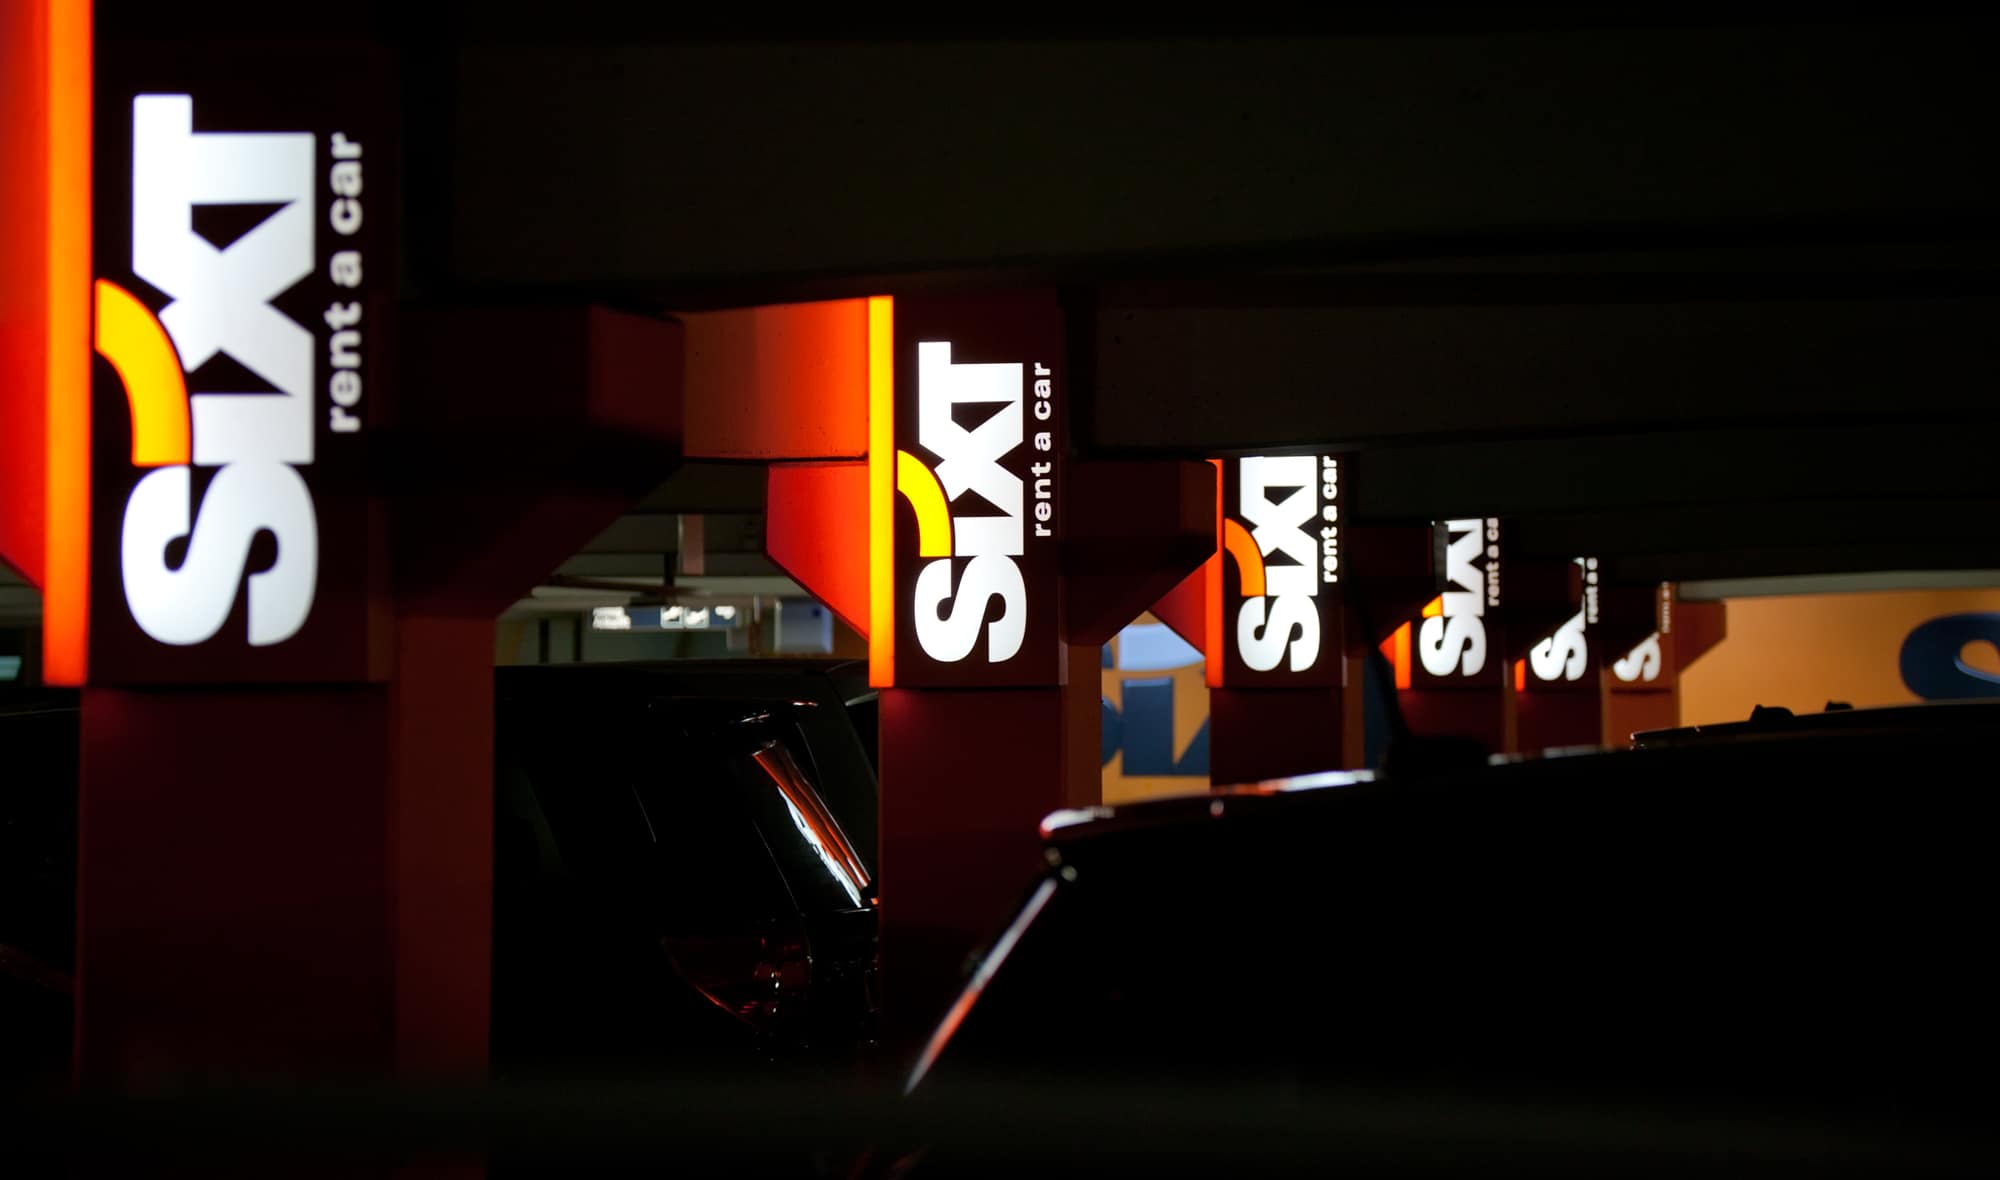 Sixt orders 100,000 electric cars